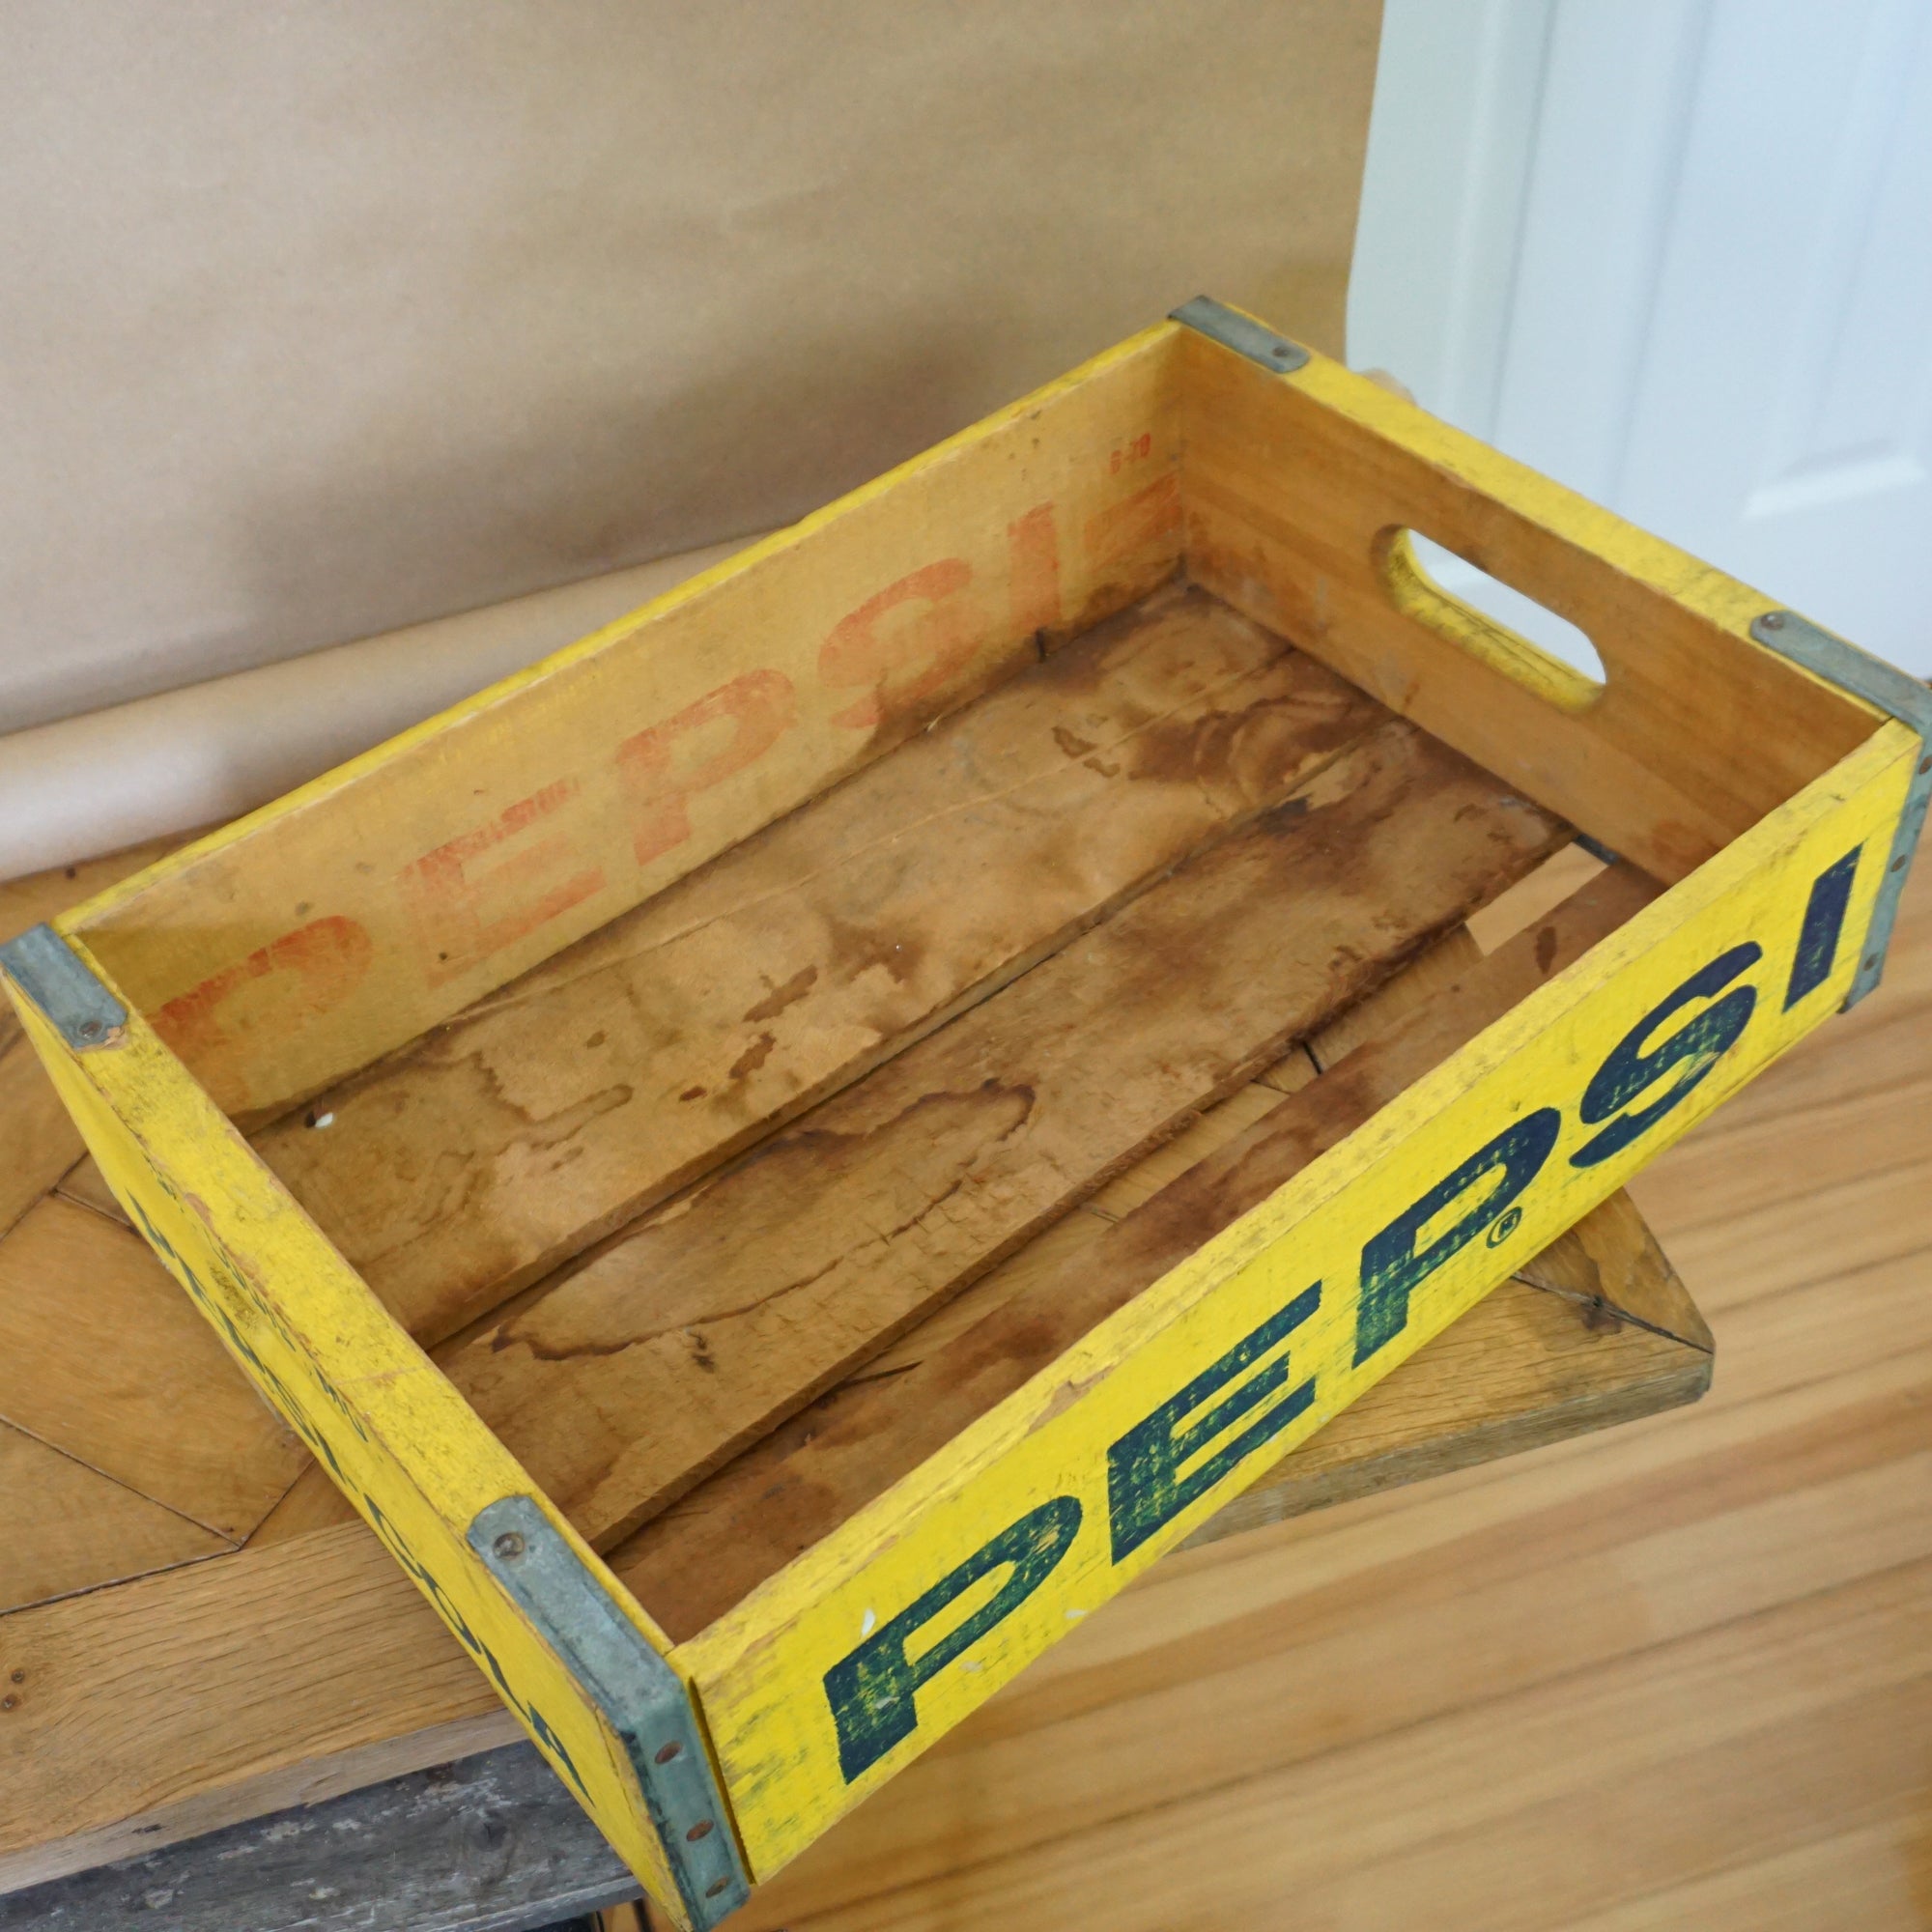 1970s Vintage PEPSI COLA Soda Bottles Yellow Tray Crate Container